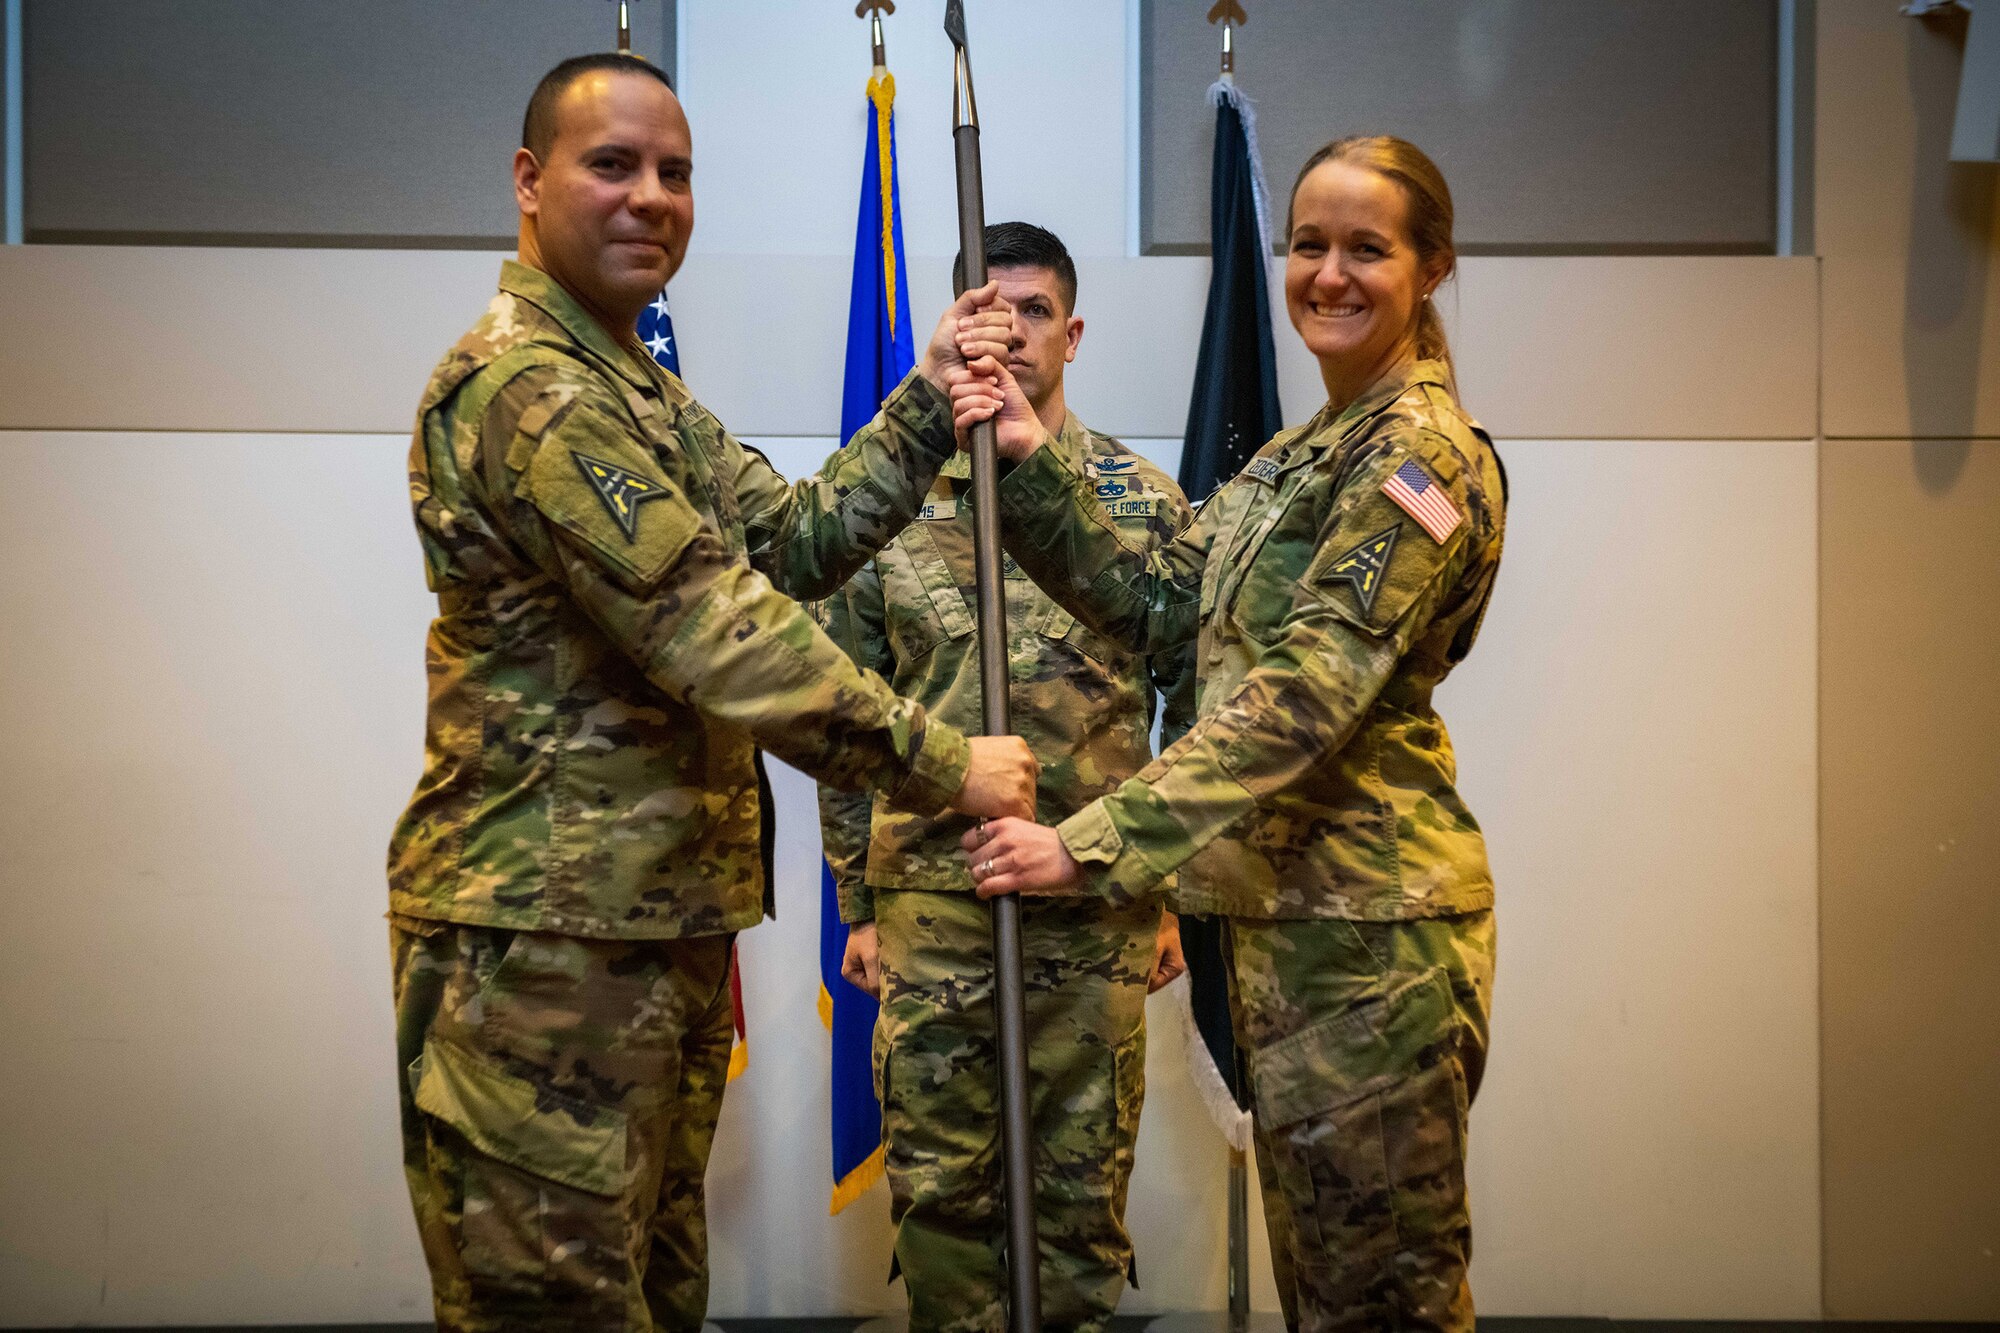 U.S. Space Force Col. Miguel Cruz (left), the Space Delta 4 commander, gives the DEL 4 spear to Lt. Col. Carrie Zederkof (right), the DEL 4 S-Staff director, to signal the activation of the DEL 4 S-Staff during the inactivation of the 460th Operations Support Squadron ceremony March 11, 2022, at the Leadership Development Center on Buckley Space Force Base, Colo.